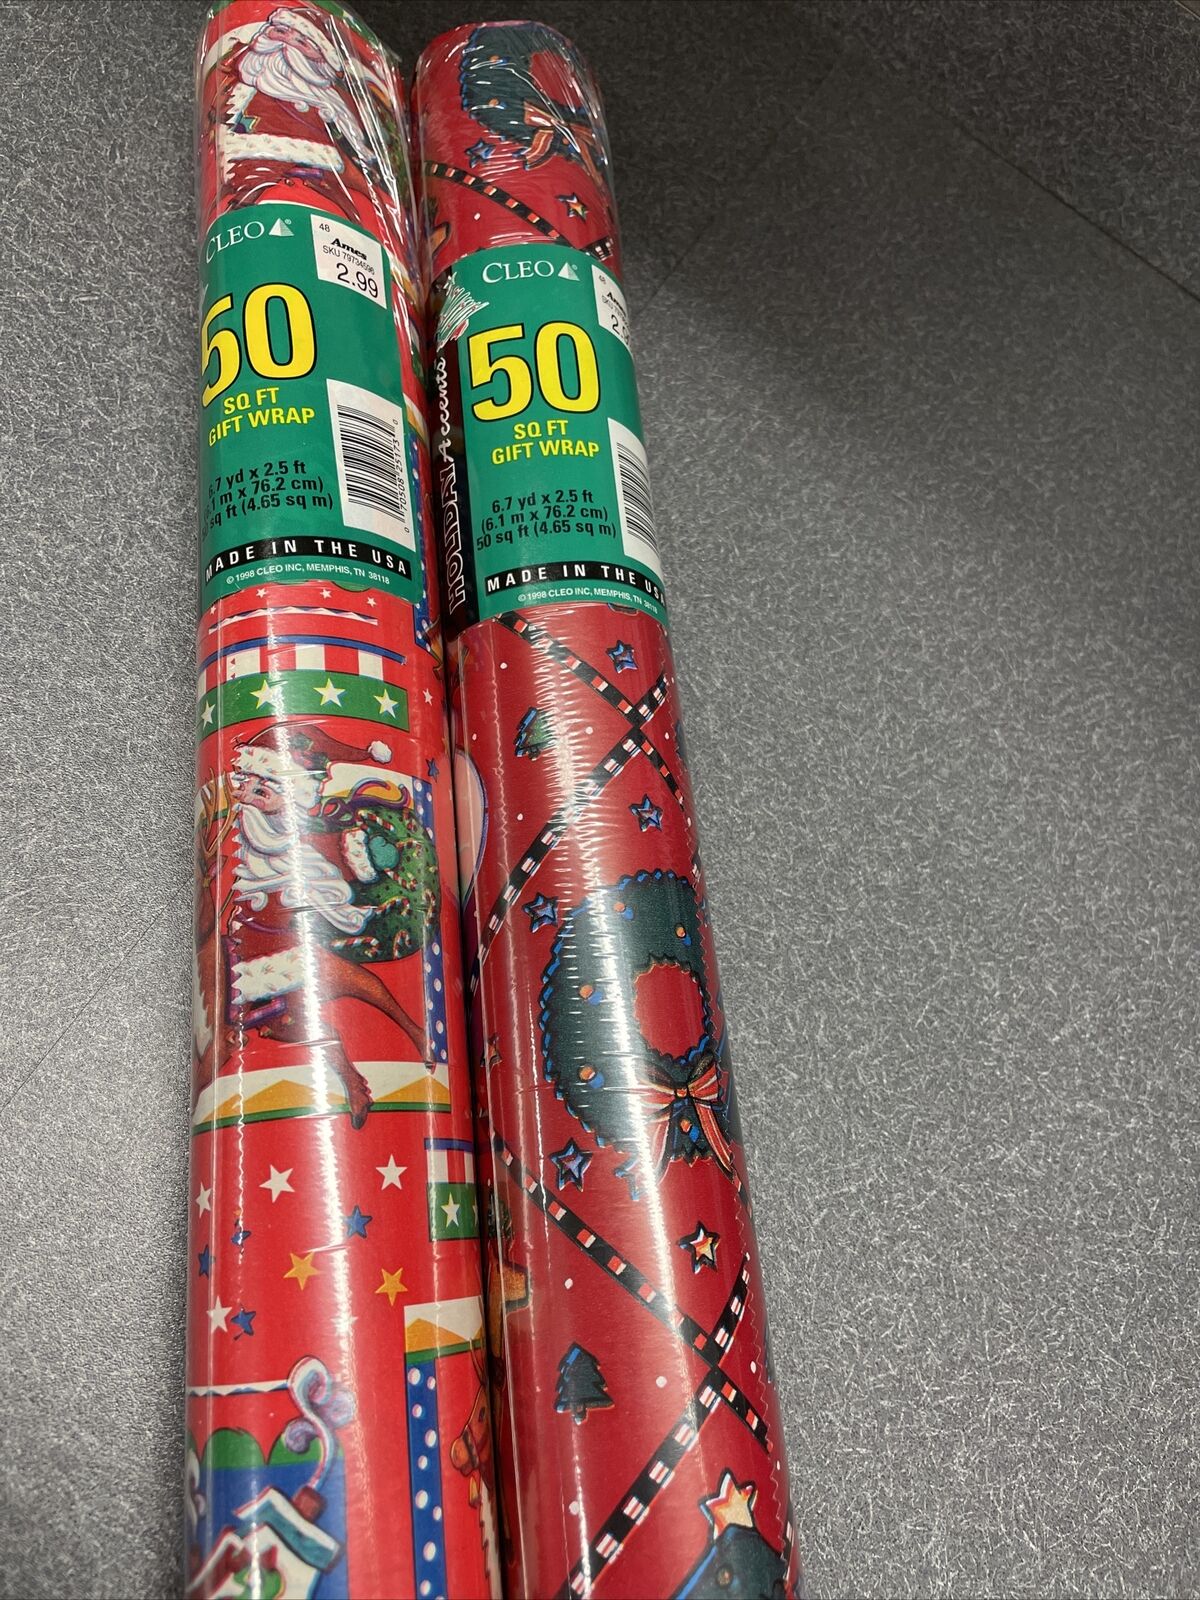 2 Sealed Vintage Cleo Christmas Wrapping Paper Rolls GiftWrap Santa Red Snowman